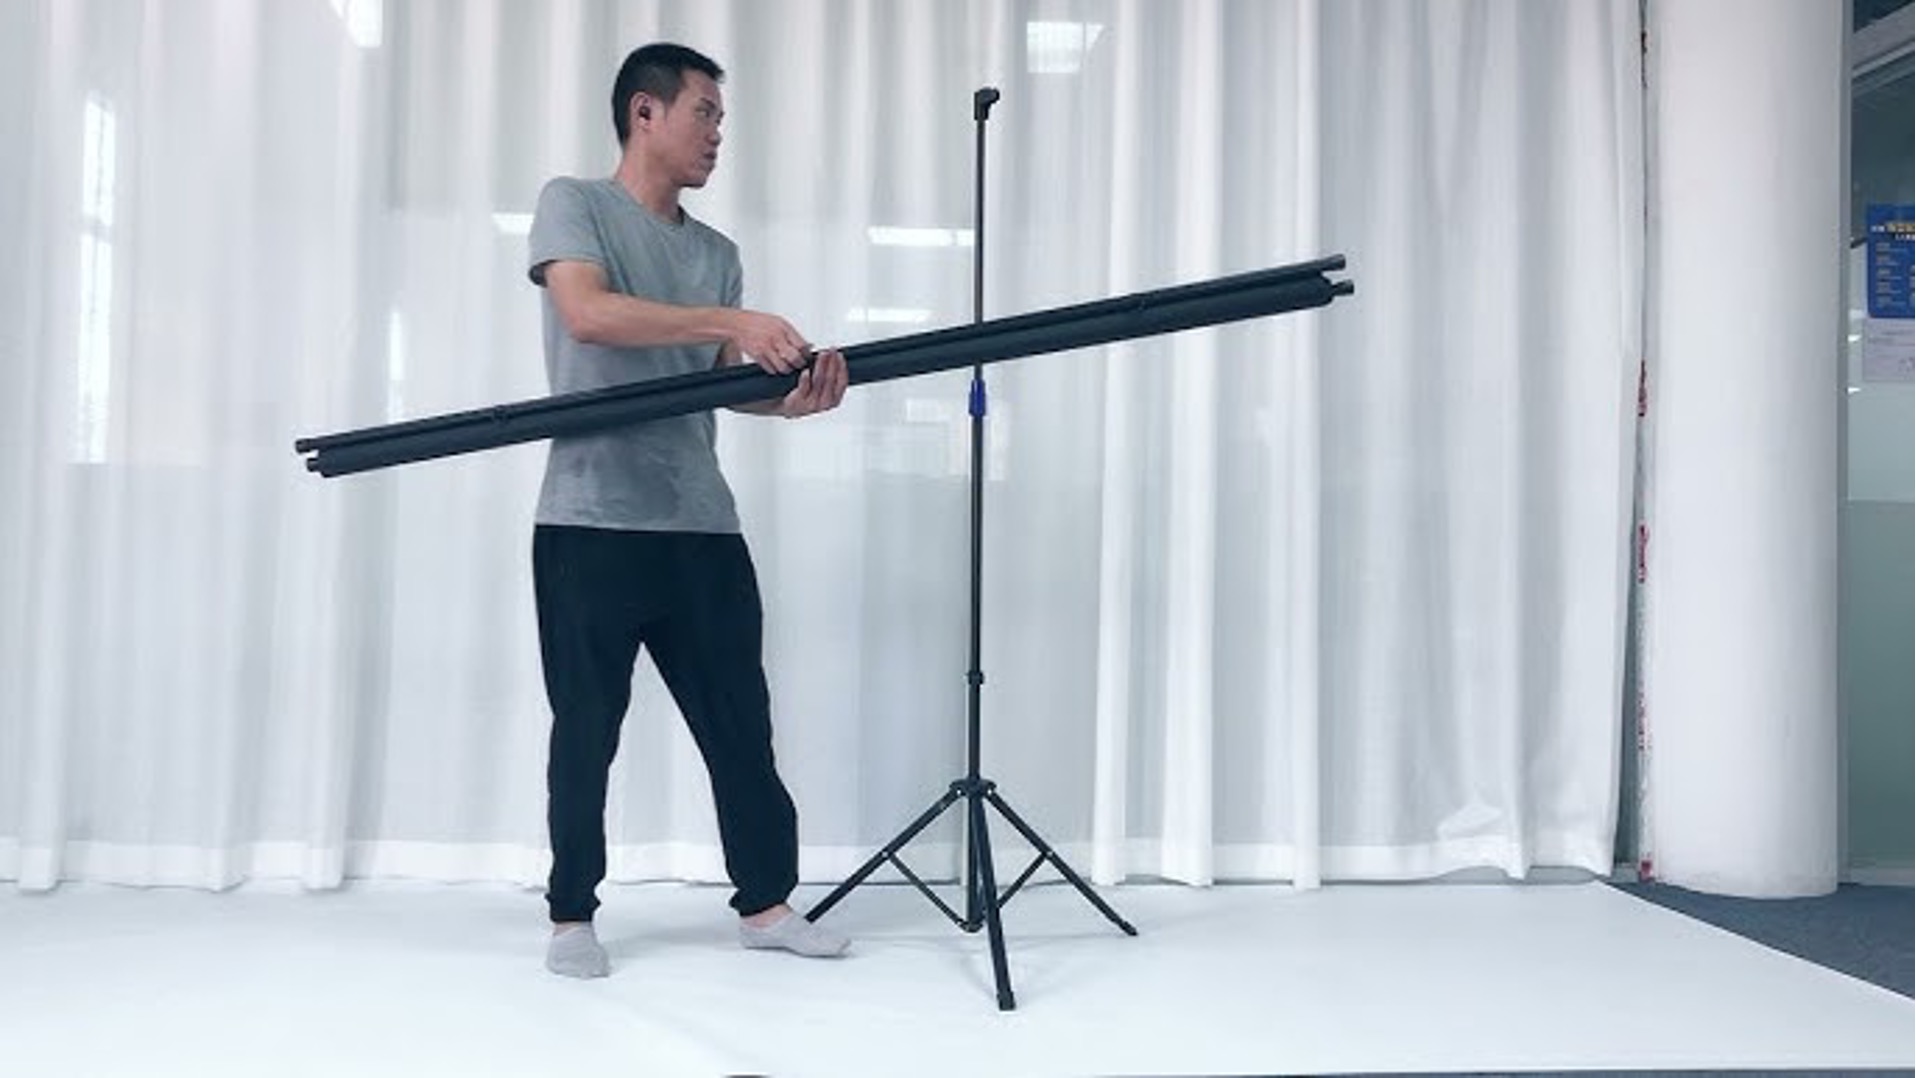 How To Set Up A Portable Projector Screen